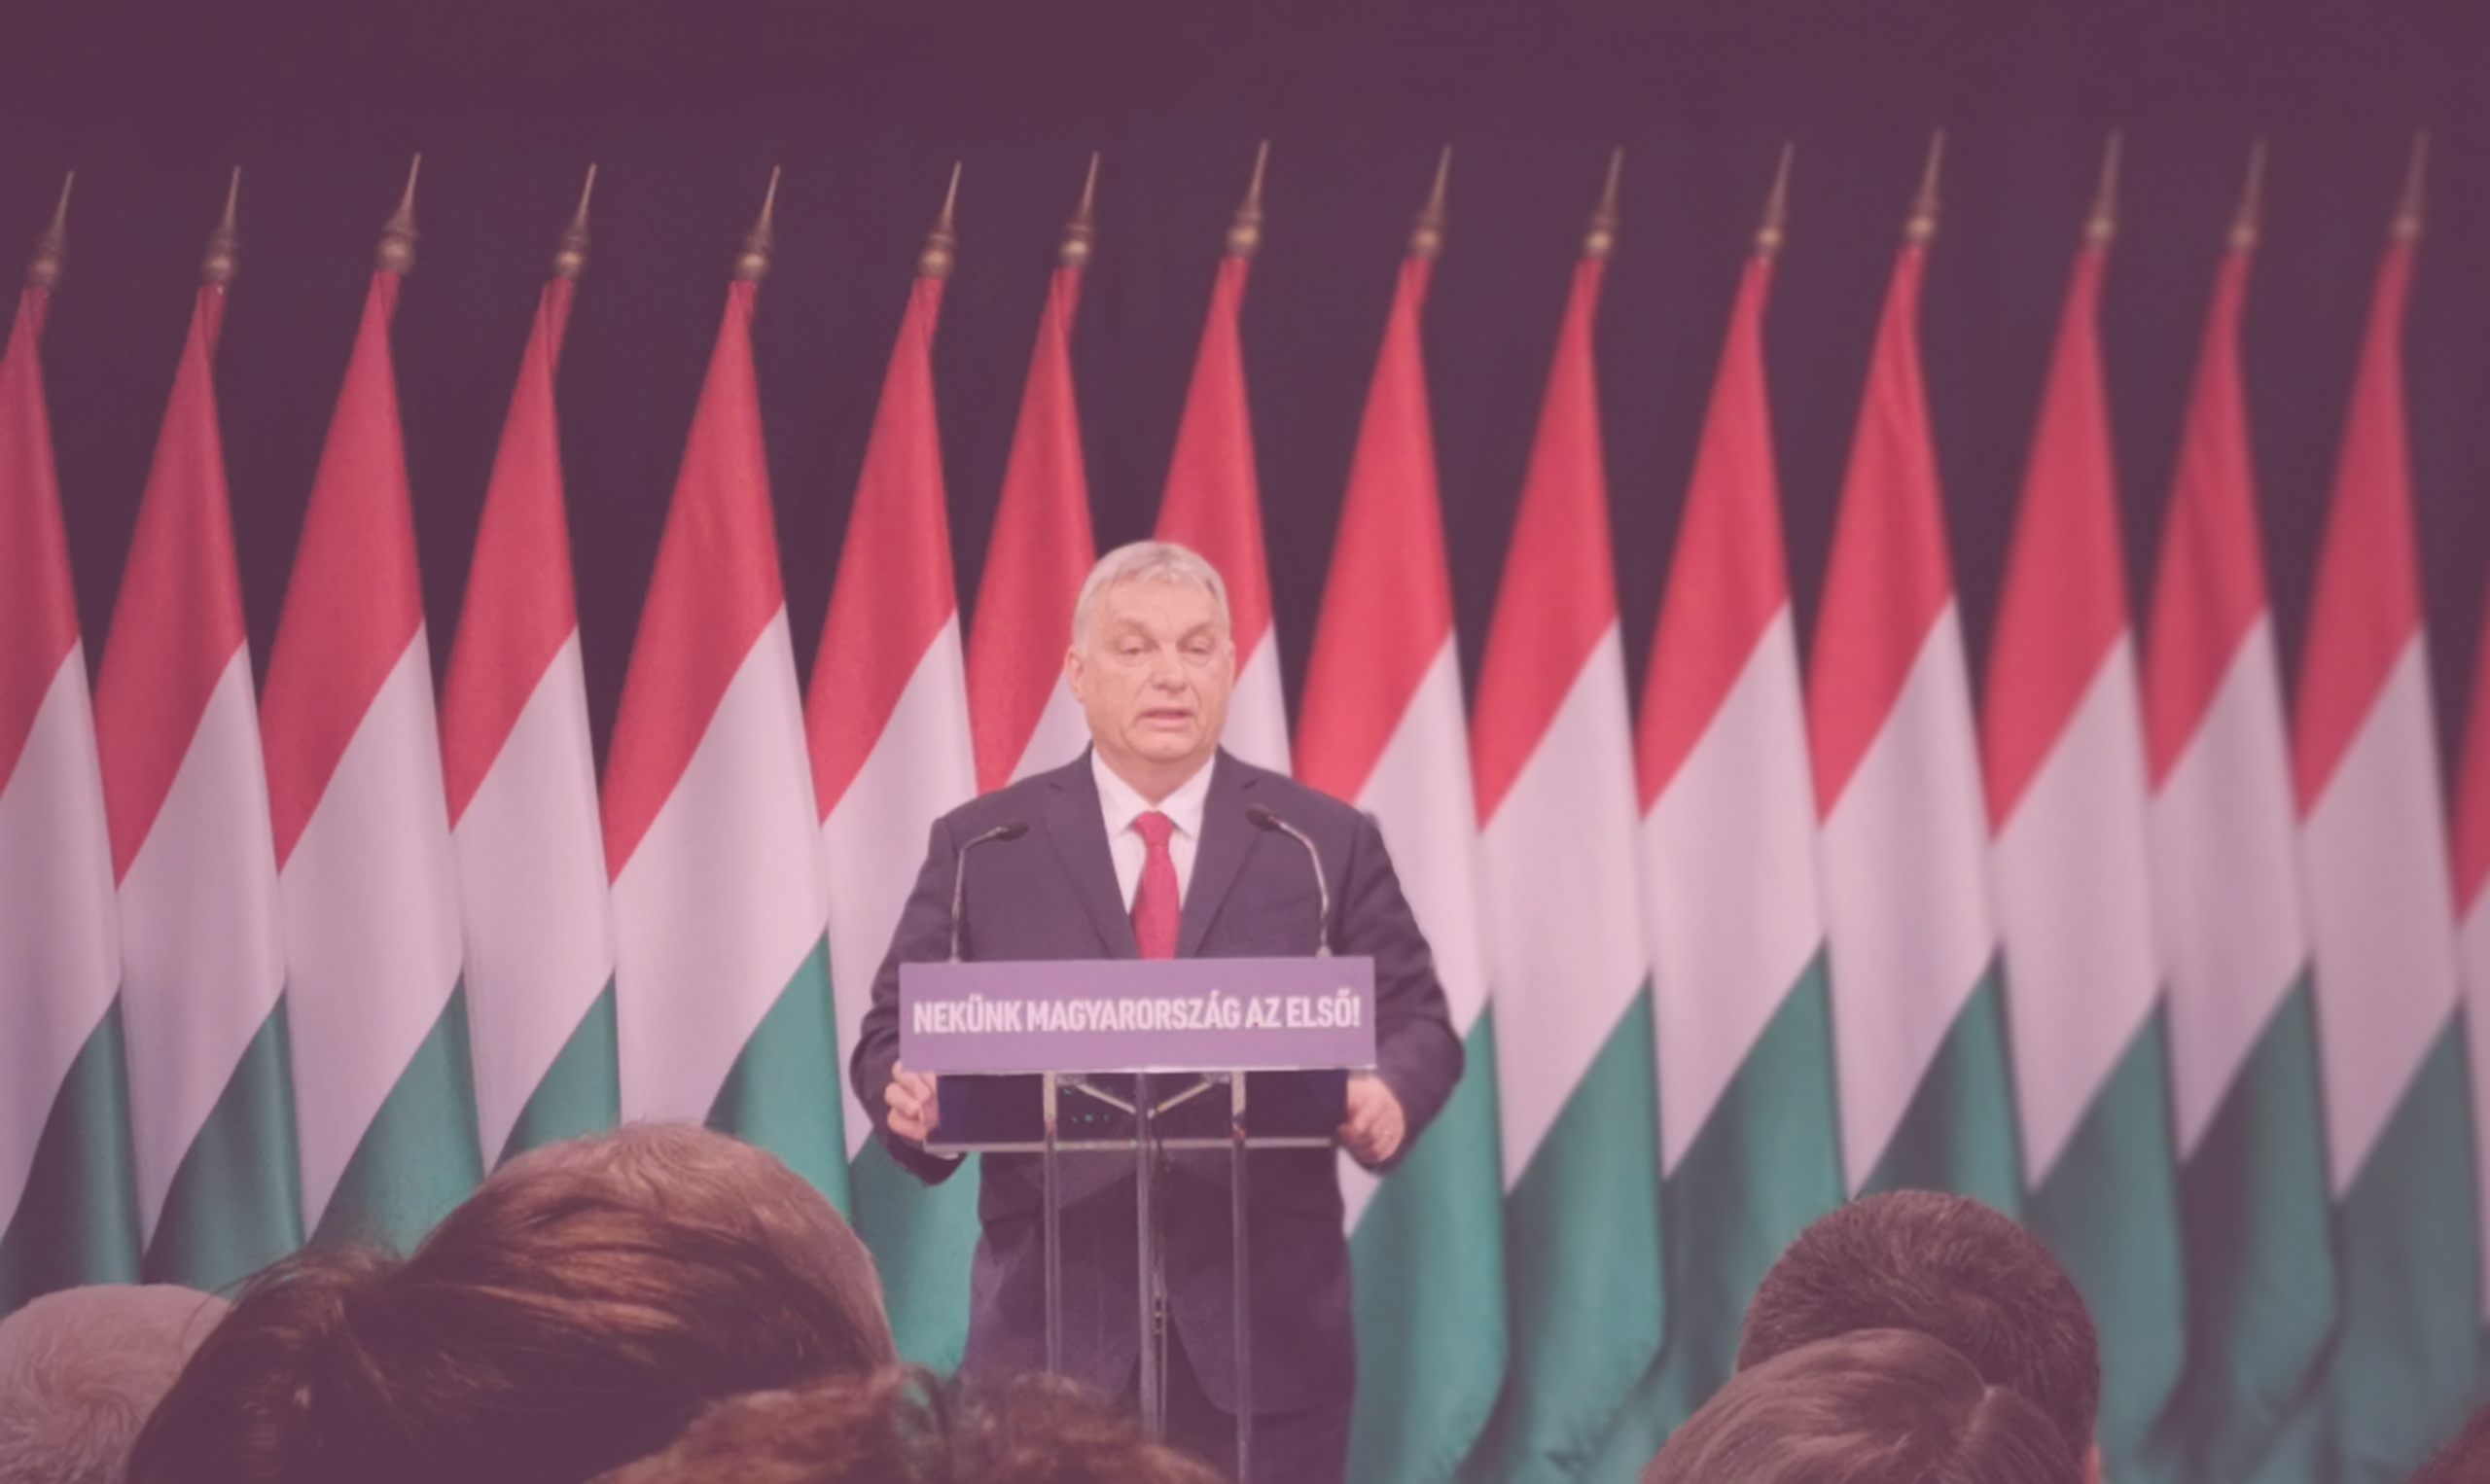 Gábor Polyák & Kata Horváth – “We Have Switched” – Uncertainty and Loss of Trust in the Hungarian Media